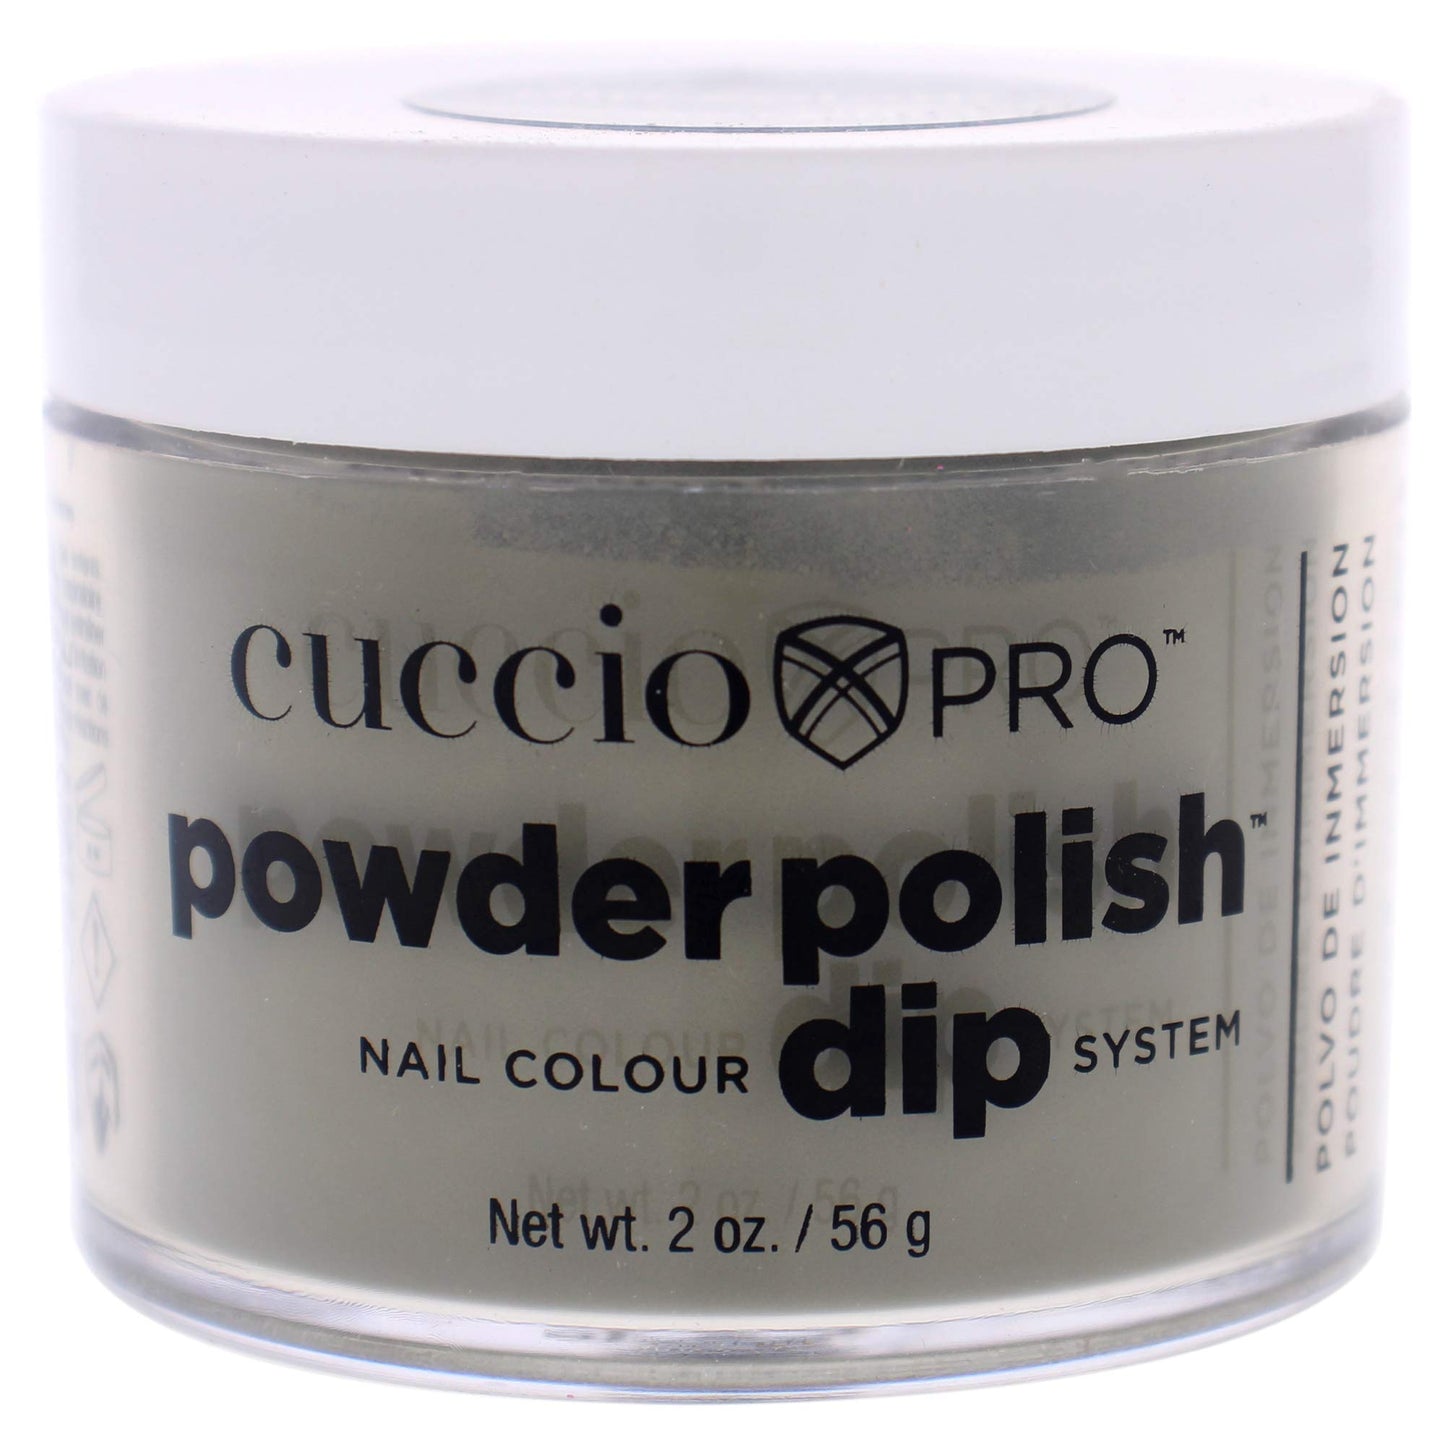 Cuccio Pro Powder Polish Dip - Branch Out - Nail Lacquer for Manicures & Pedicures, Easy & Fast Application/Removal - No LED/UV Light Needed - Non-Toxic, Odorless, Highly Pigmented - 2 oz